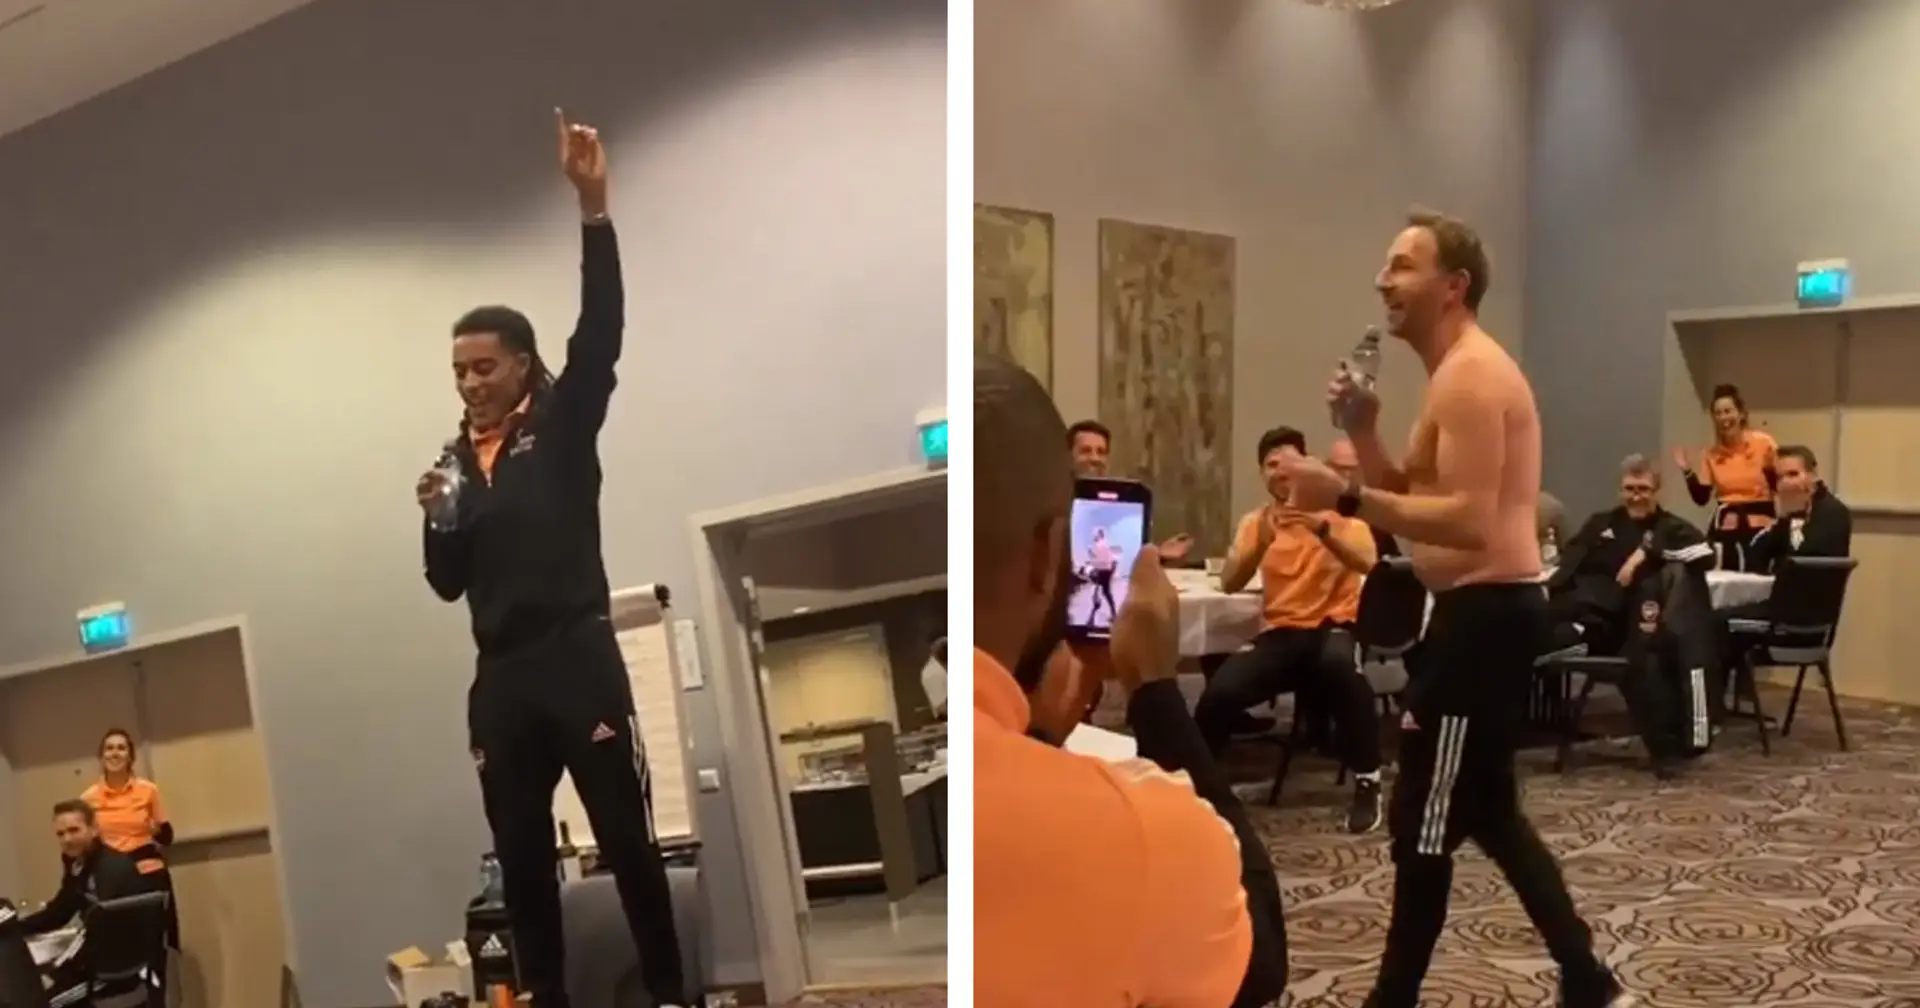 Pop star Azeez and bare-chested coach Georgson sing initiation songs as Arsenal get stuck in Norway (video)